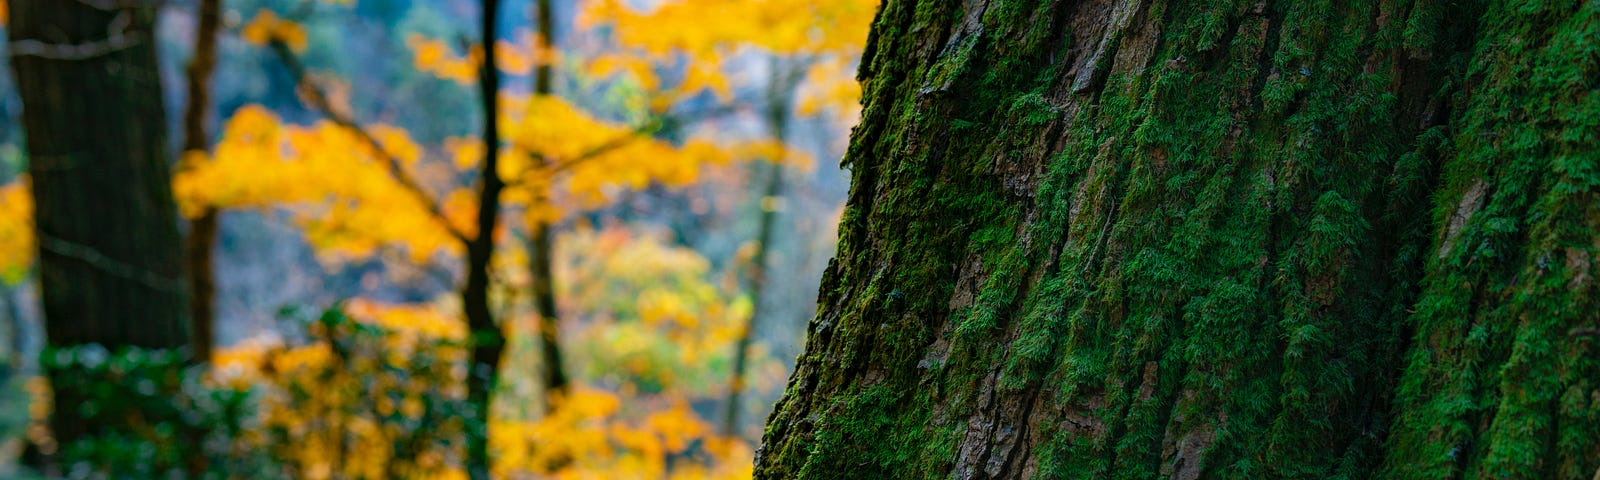 Trees with golden yellow leaves in the background with mossy green tree trunk in the foreground on the right.